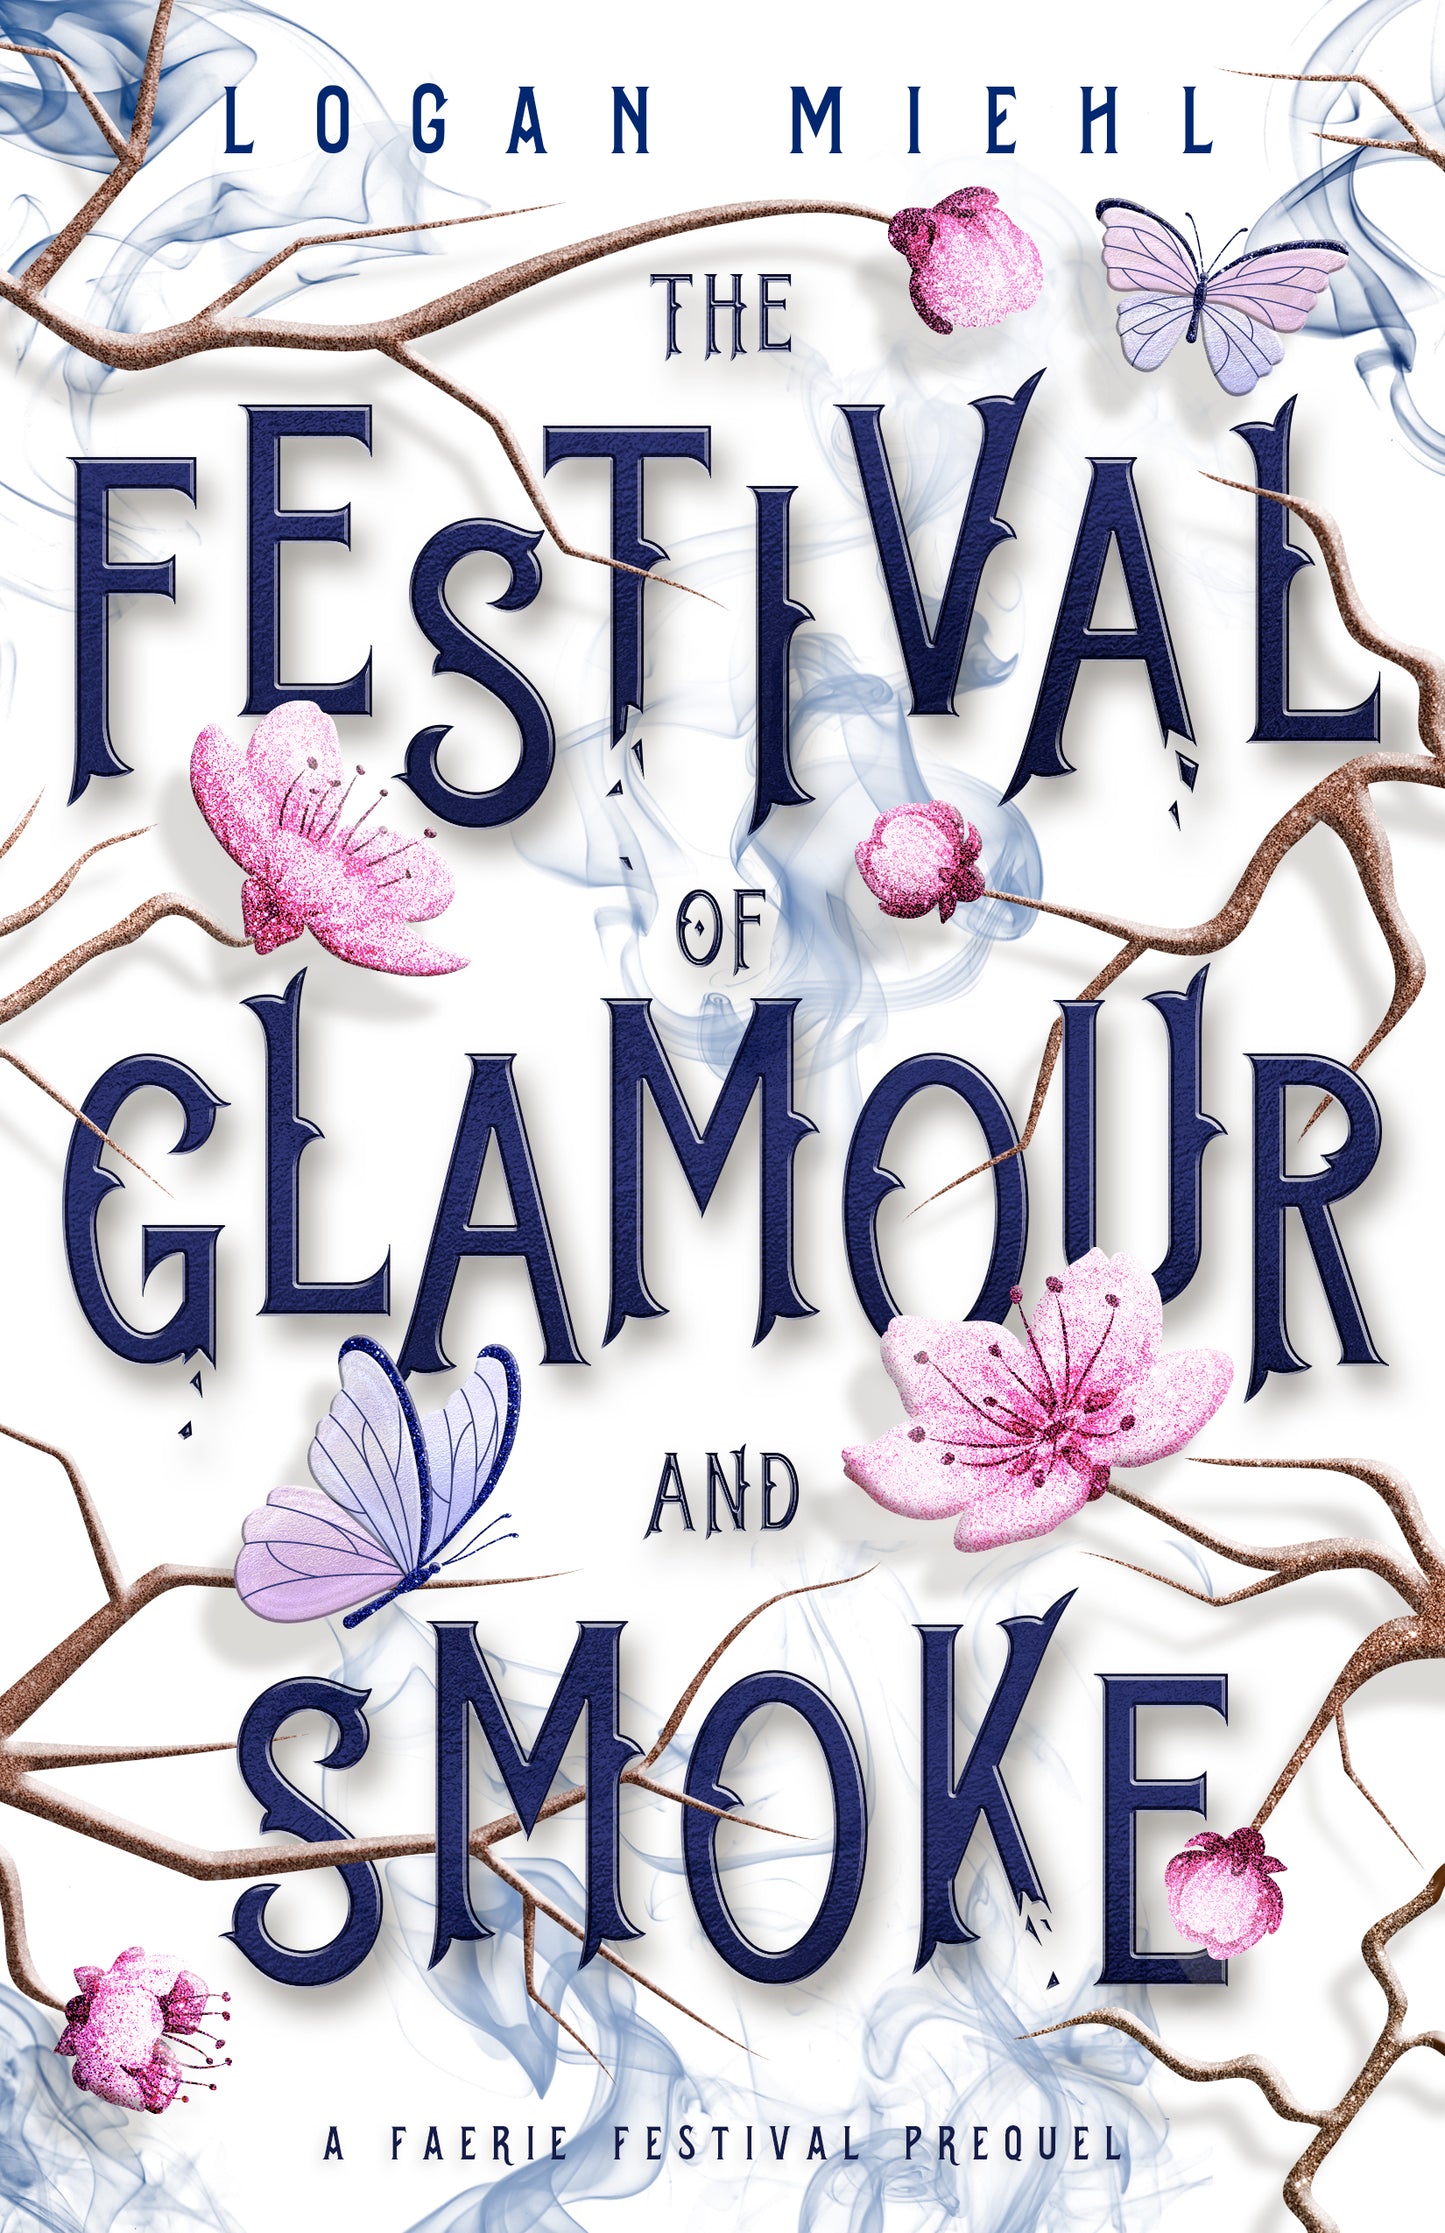 The Festival of Glamour and Smoke (Ebook, Prequel)